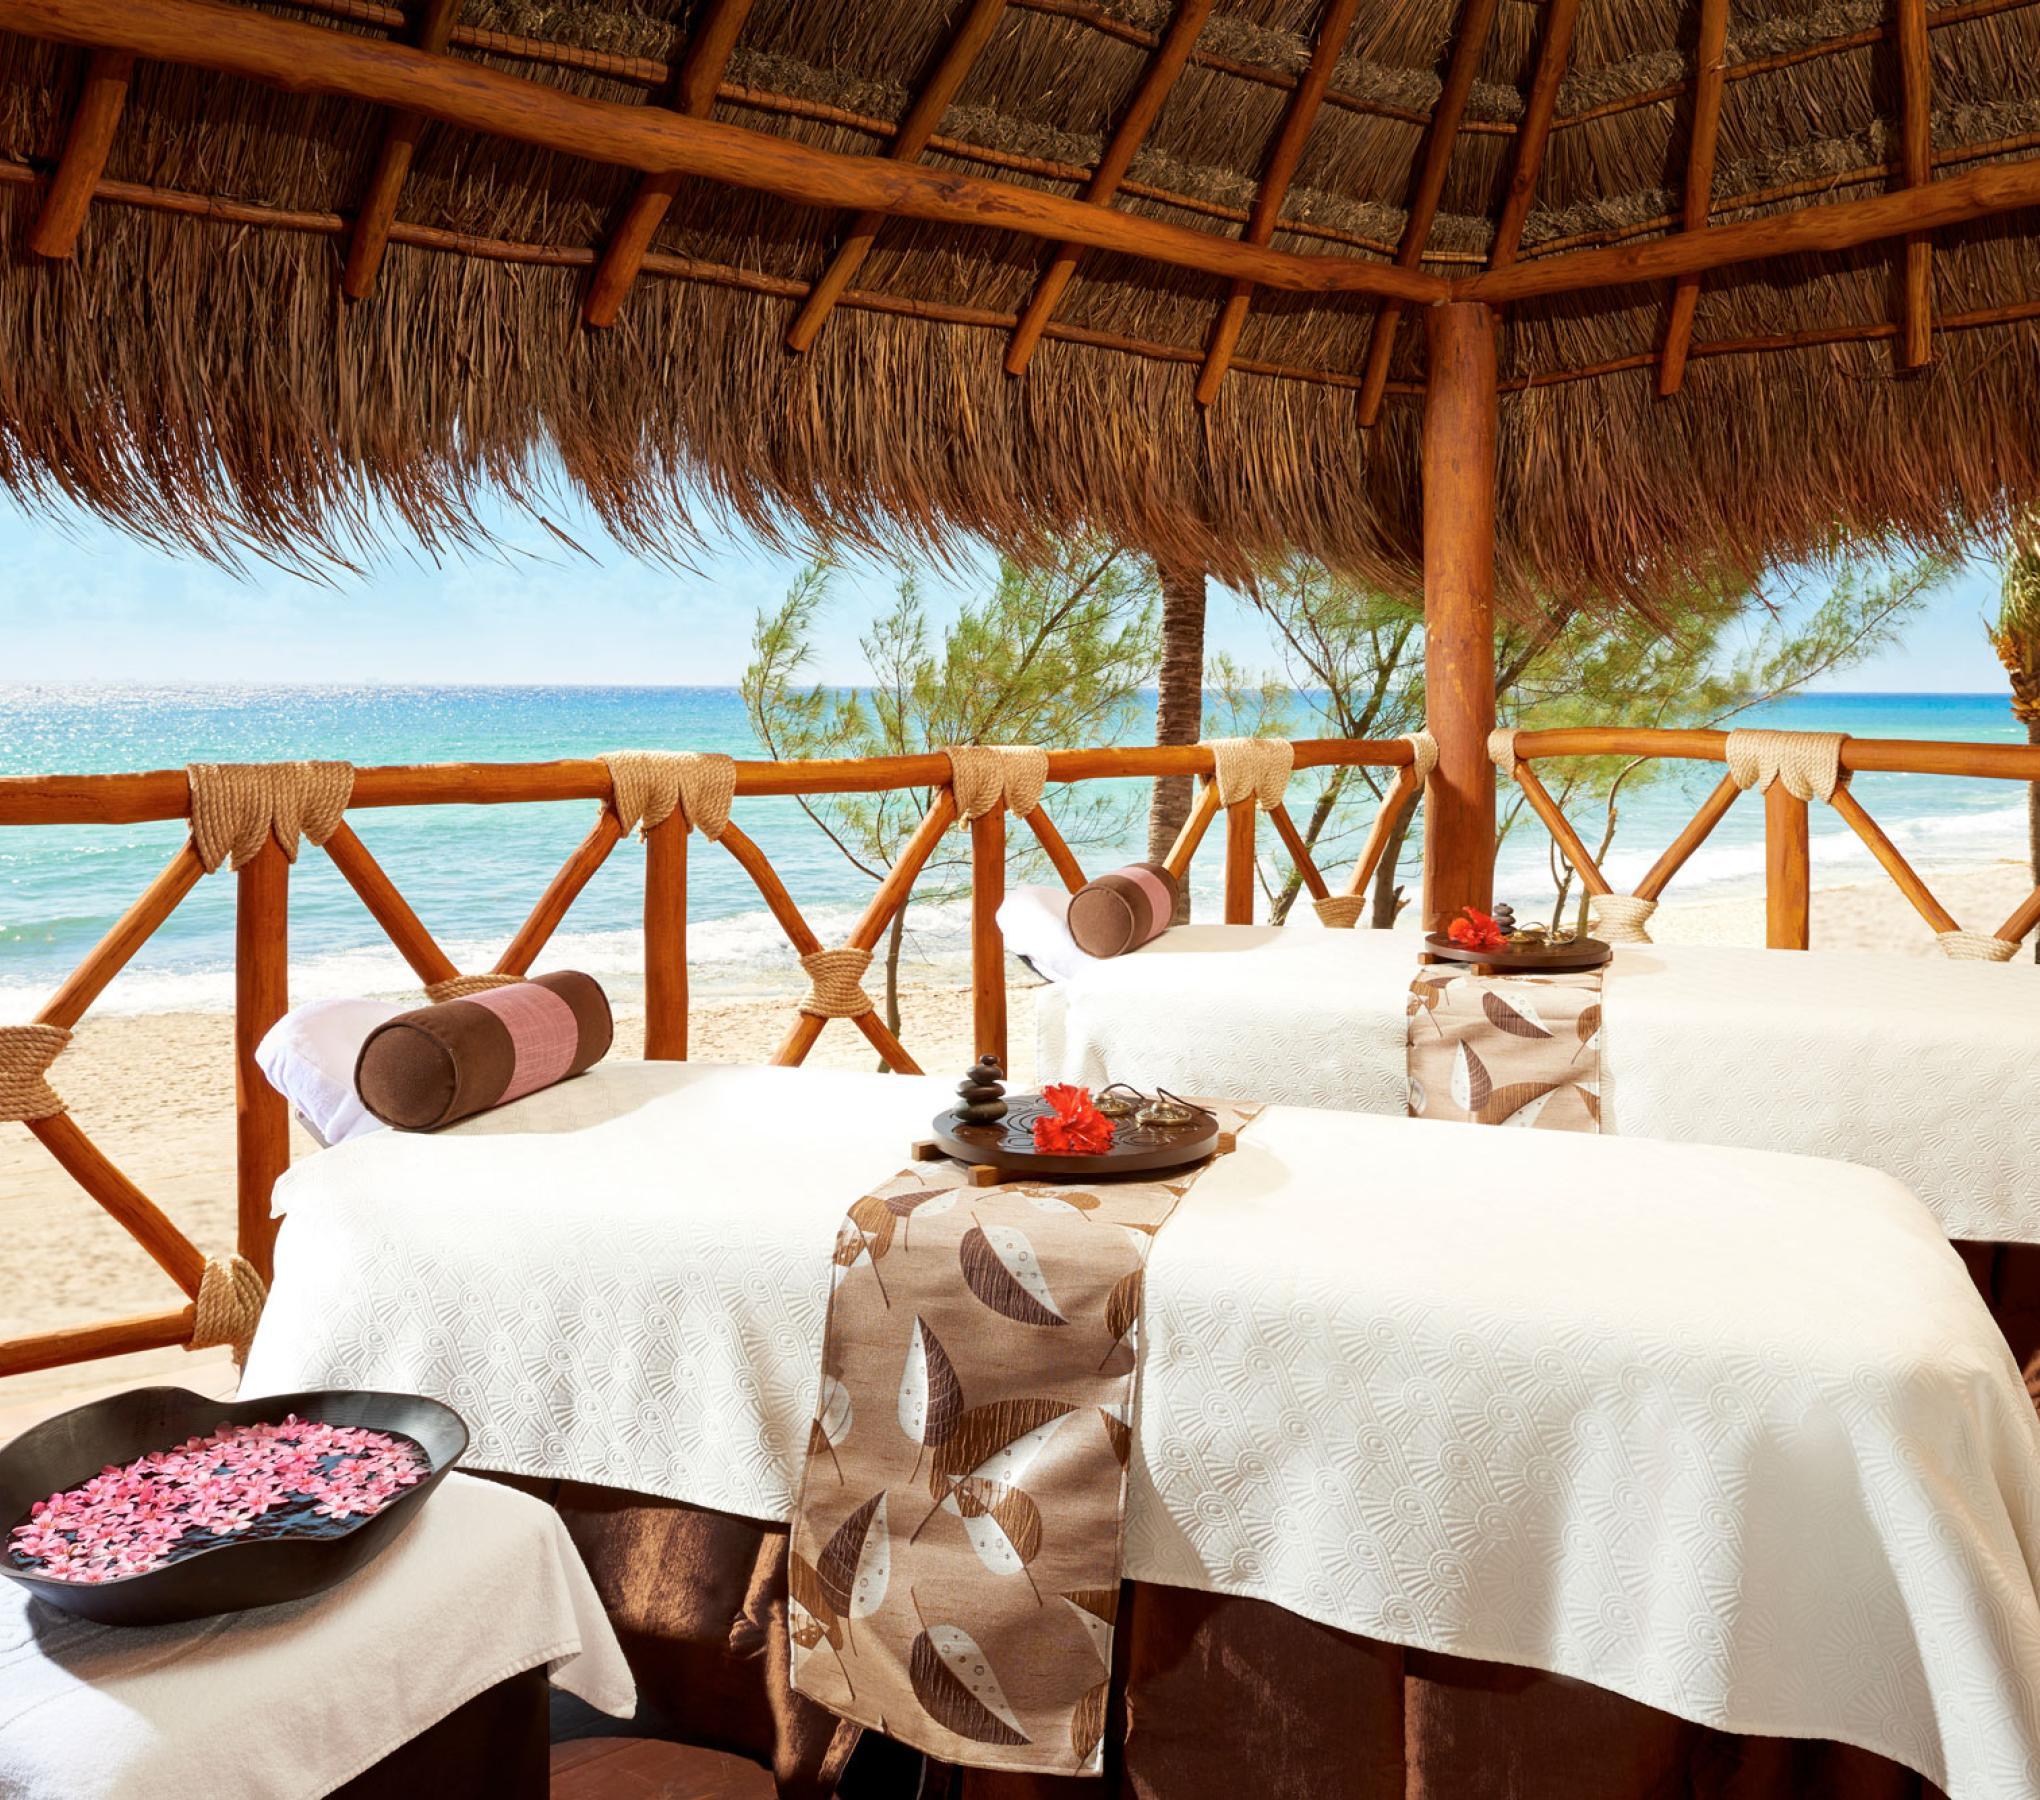 massage beds by the beach